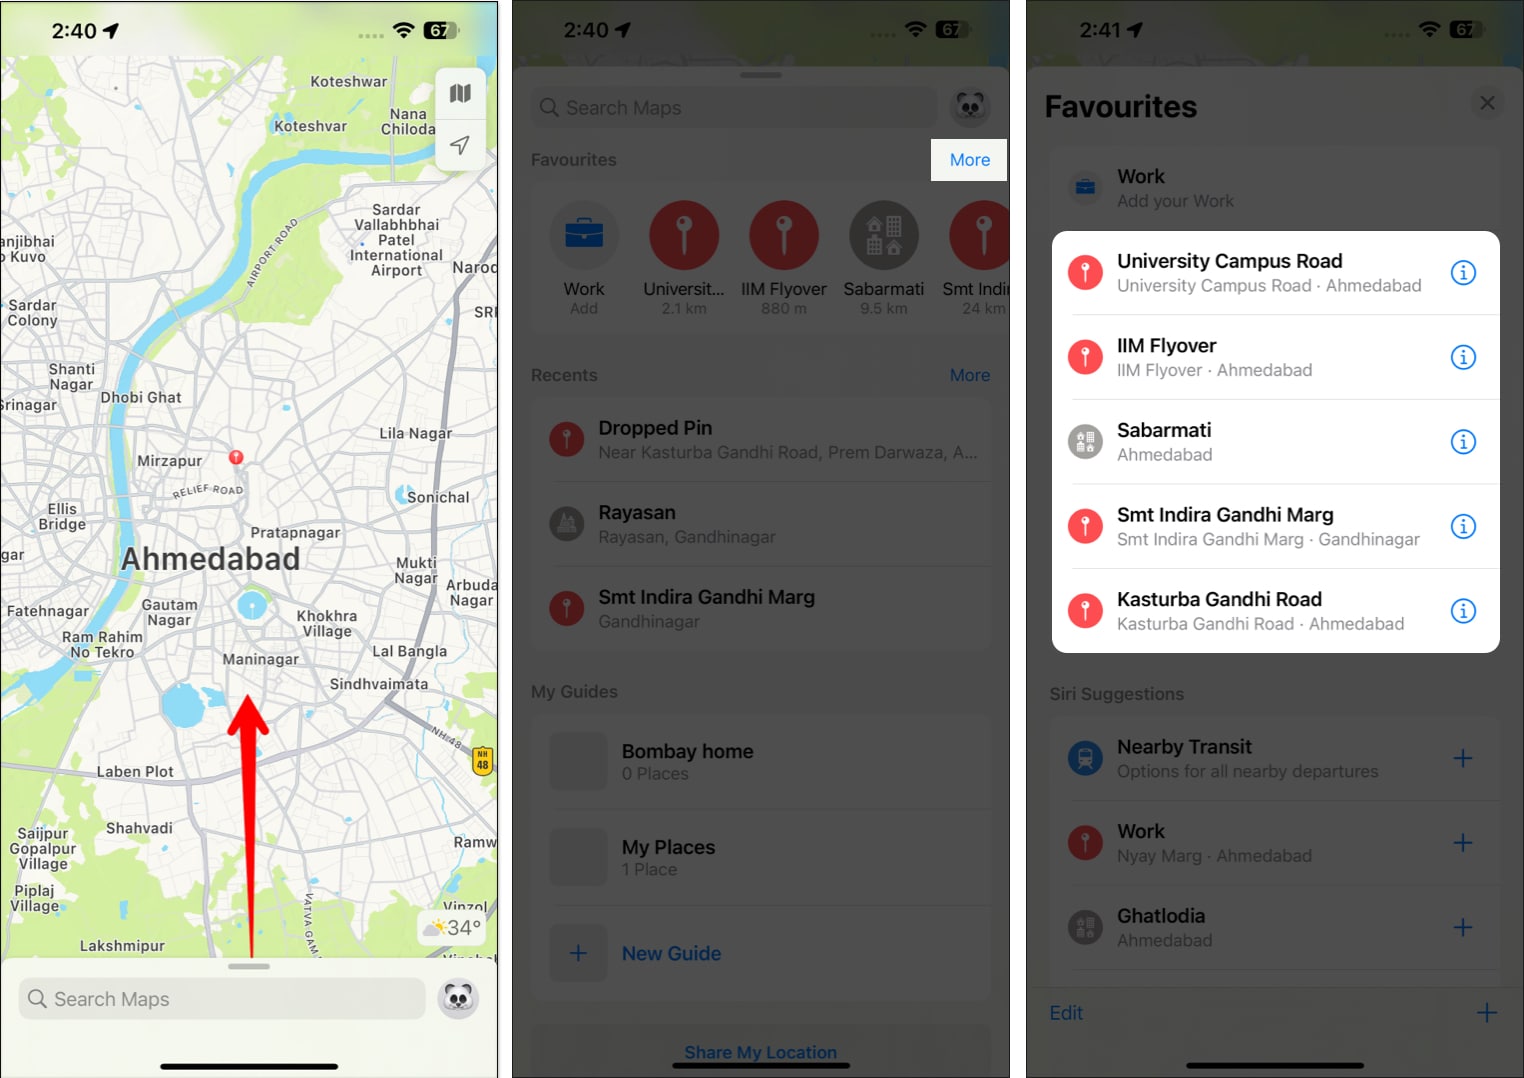 Swipe up Apple Maps, tap more to access Favorites